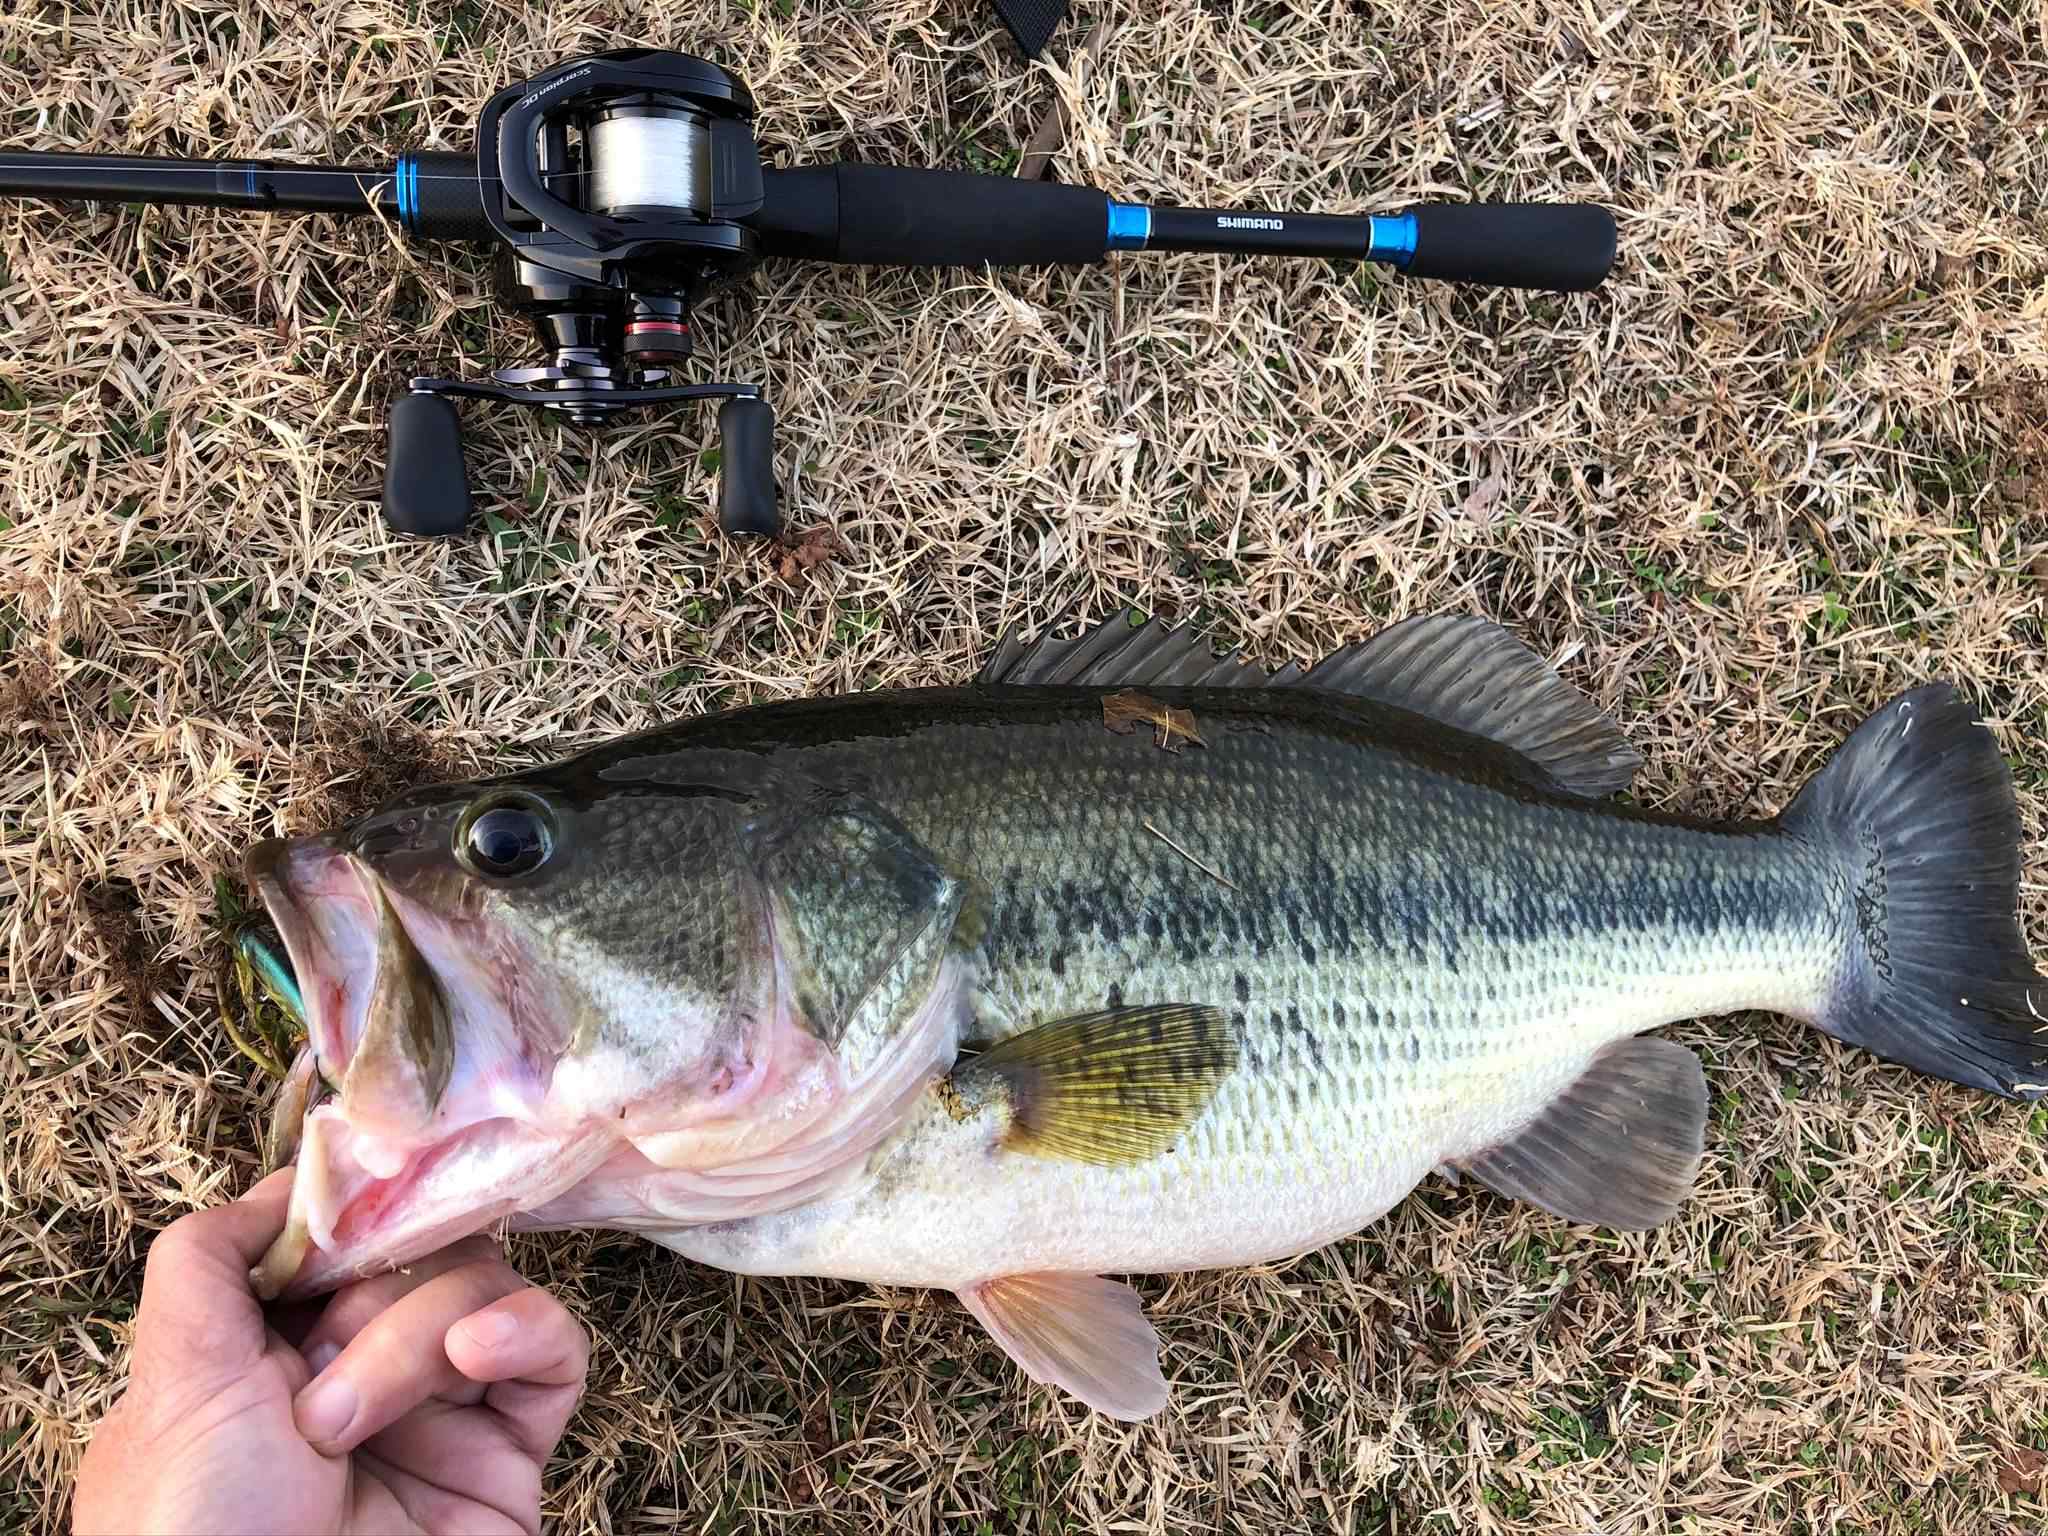 Looking to buy a dedicated jerkbait casting rod to pair with Curado MGL 150  - Fishing Rods, Reels, Line, and Knots - Bass Fishing Forums